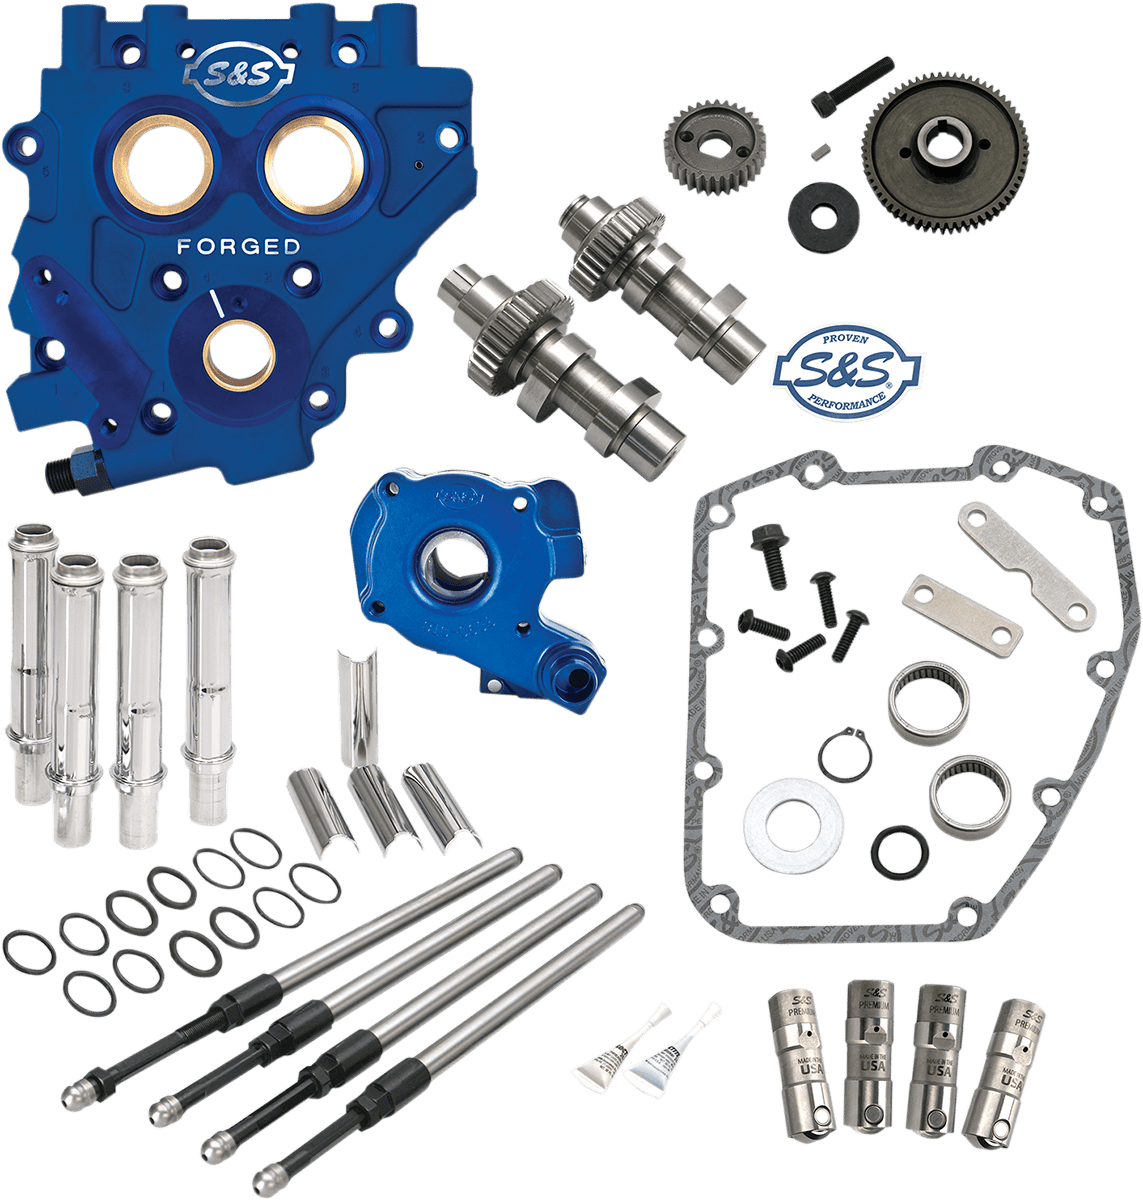 S&S CYCLES-Gear & Chain Drive Cam Chest Kits / '99-'17 Twin Cams-Camchest Kits-MetalCore Harley Supply